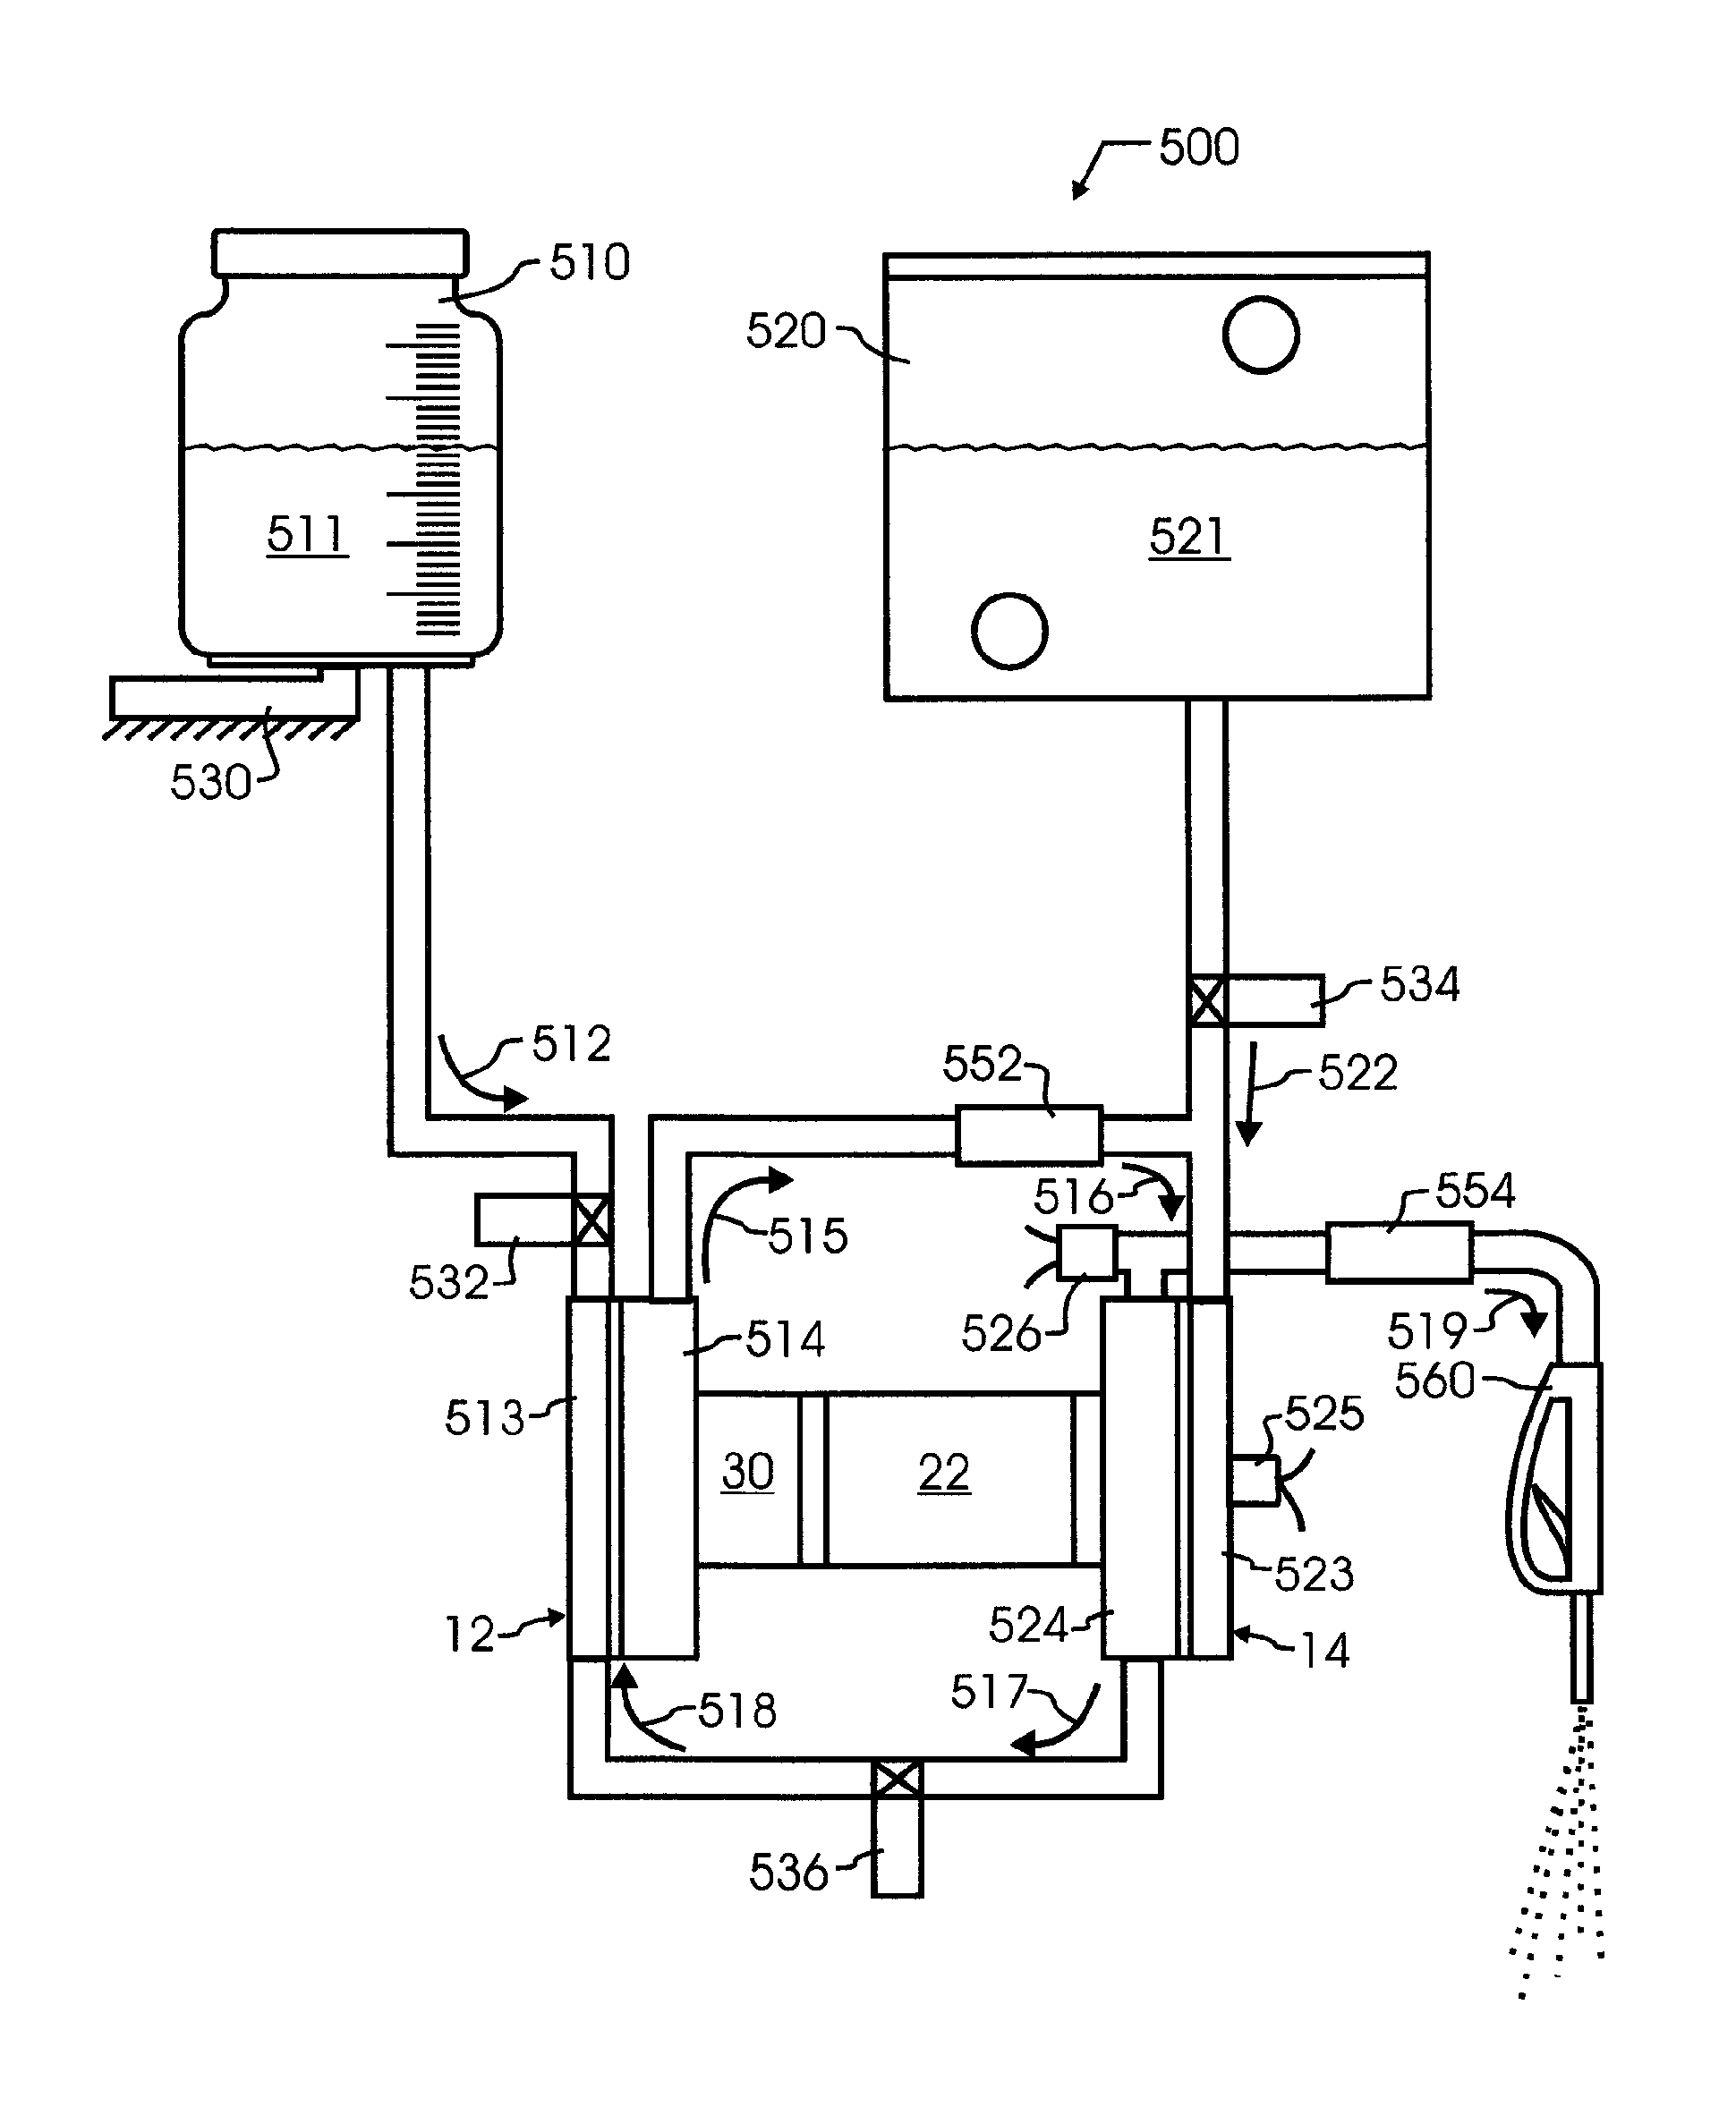 Proportioning pump, control systems and applicator apparatus